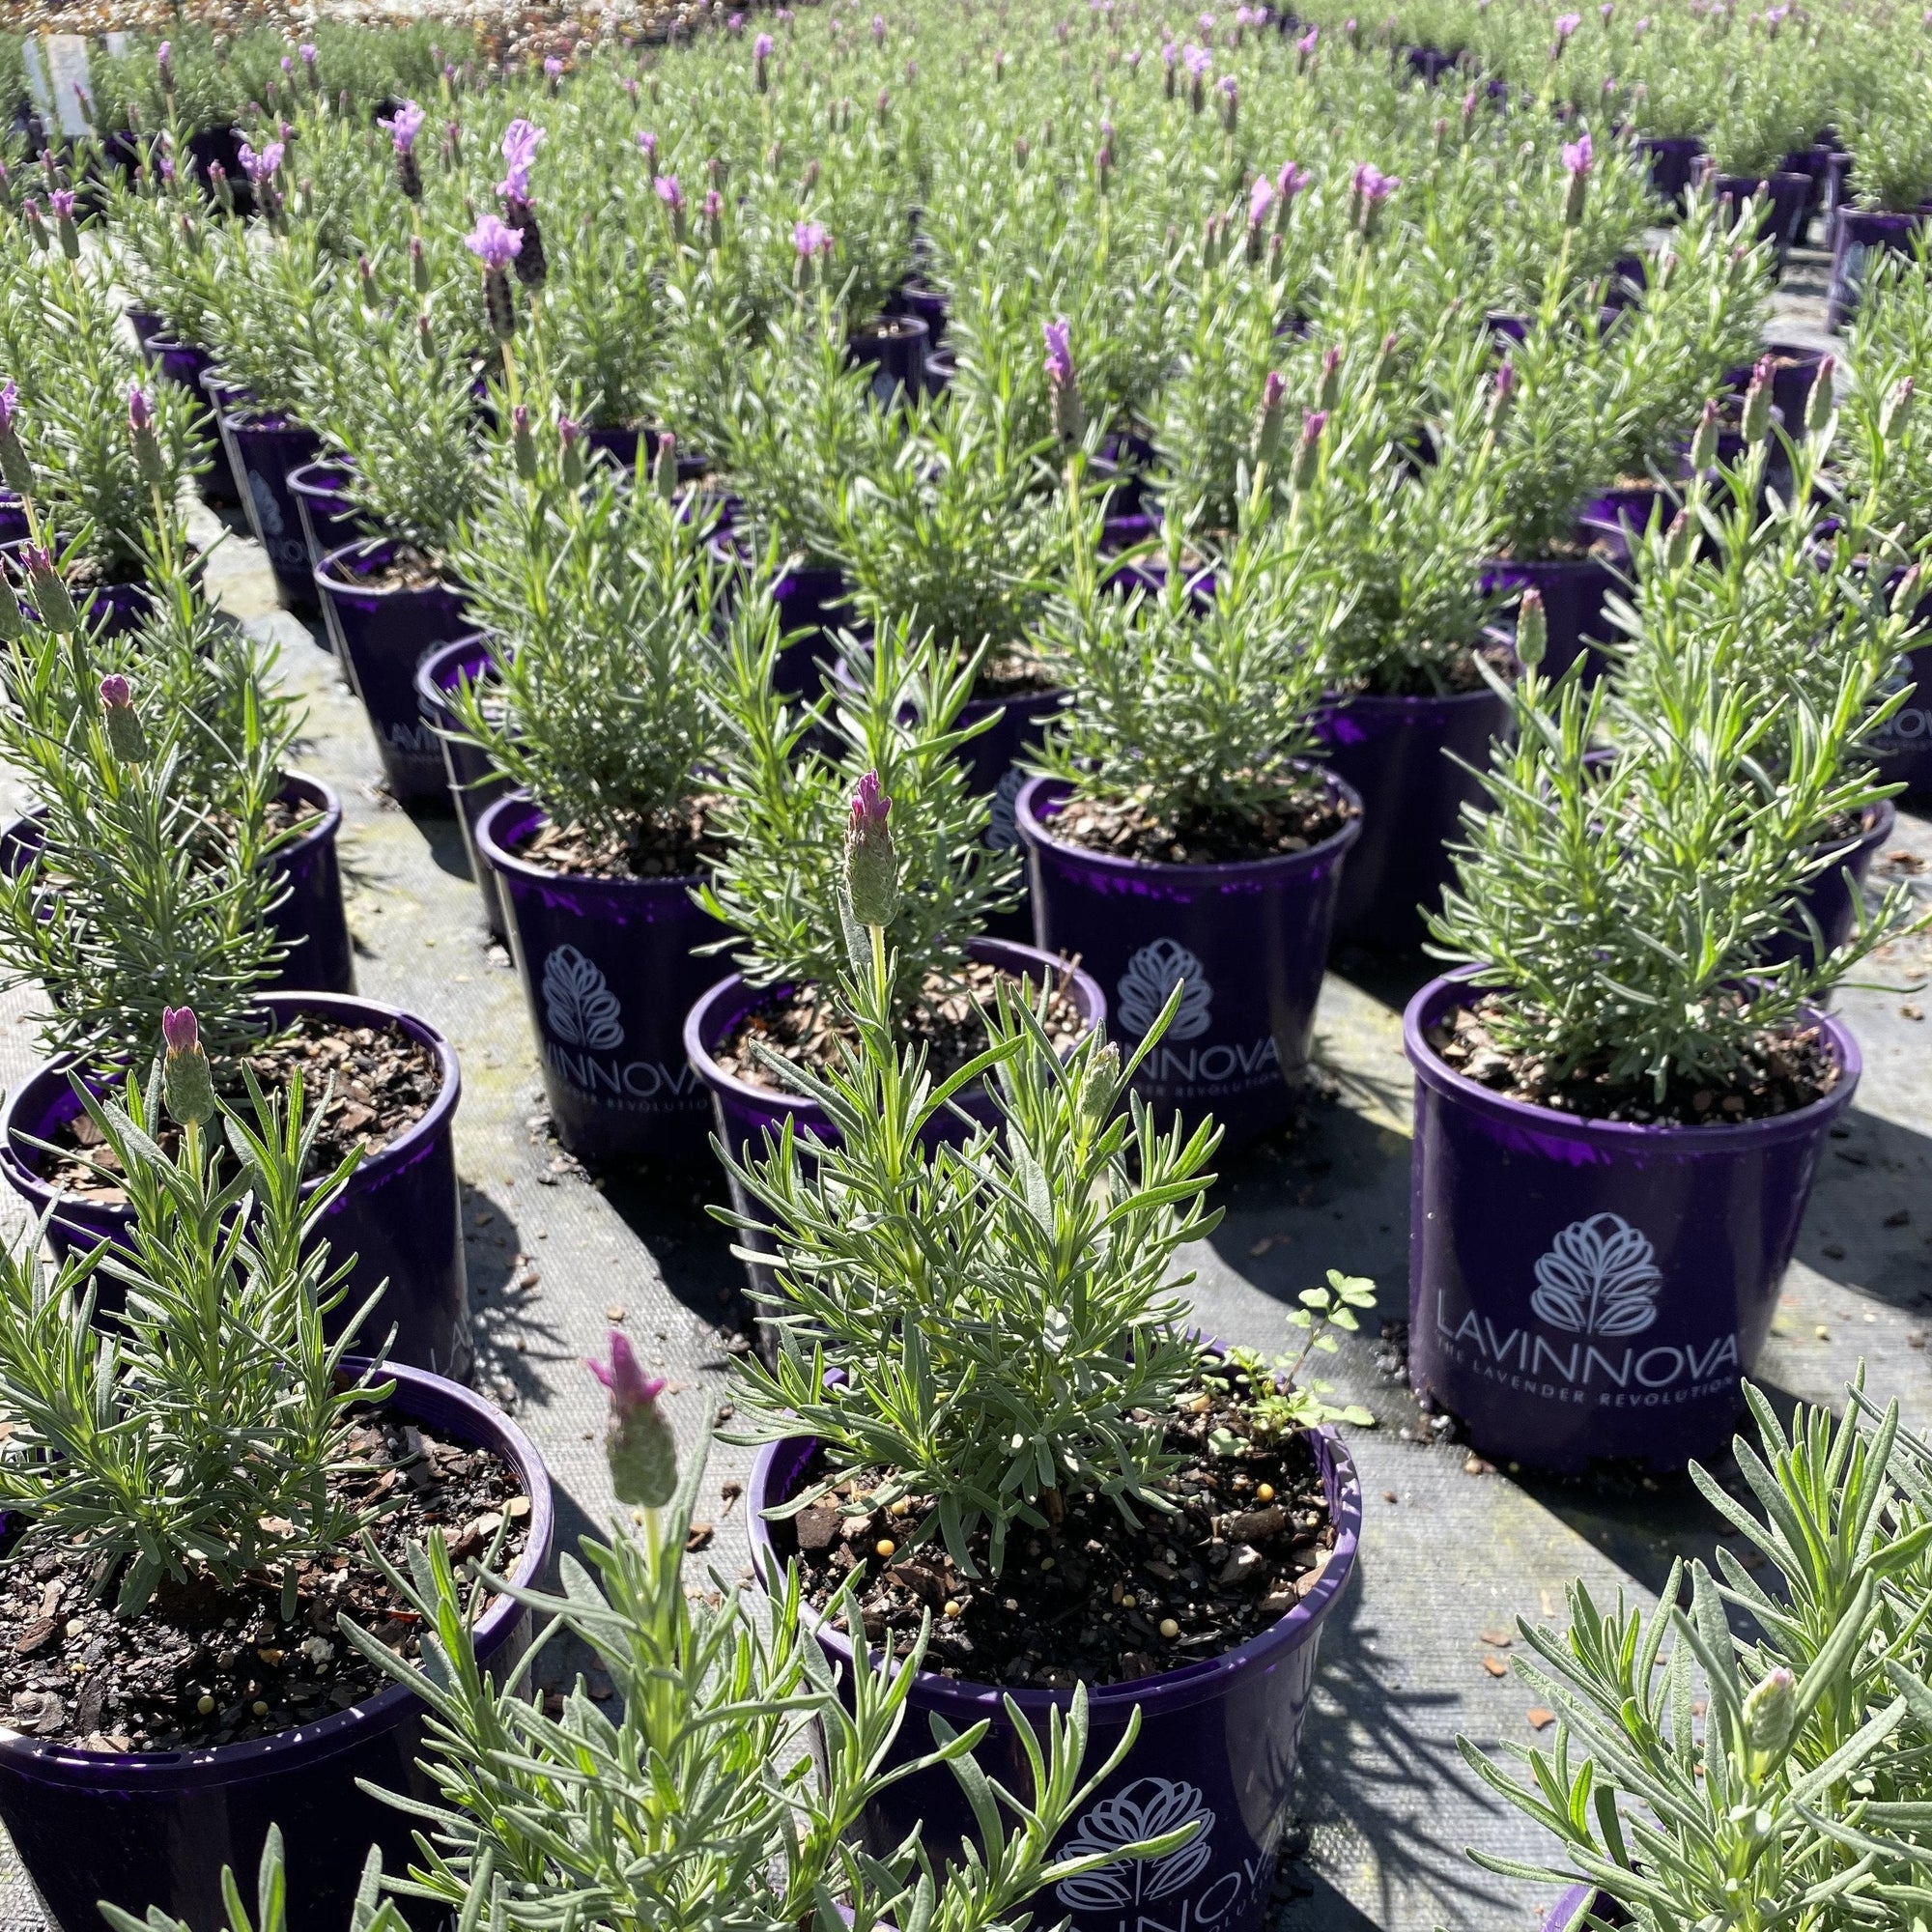 One of the best performing flowering and high impact lavenders, The Queen is hard to beat.